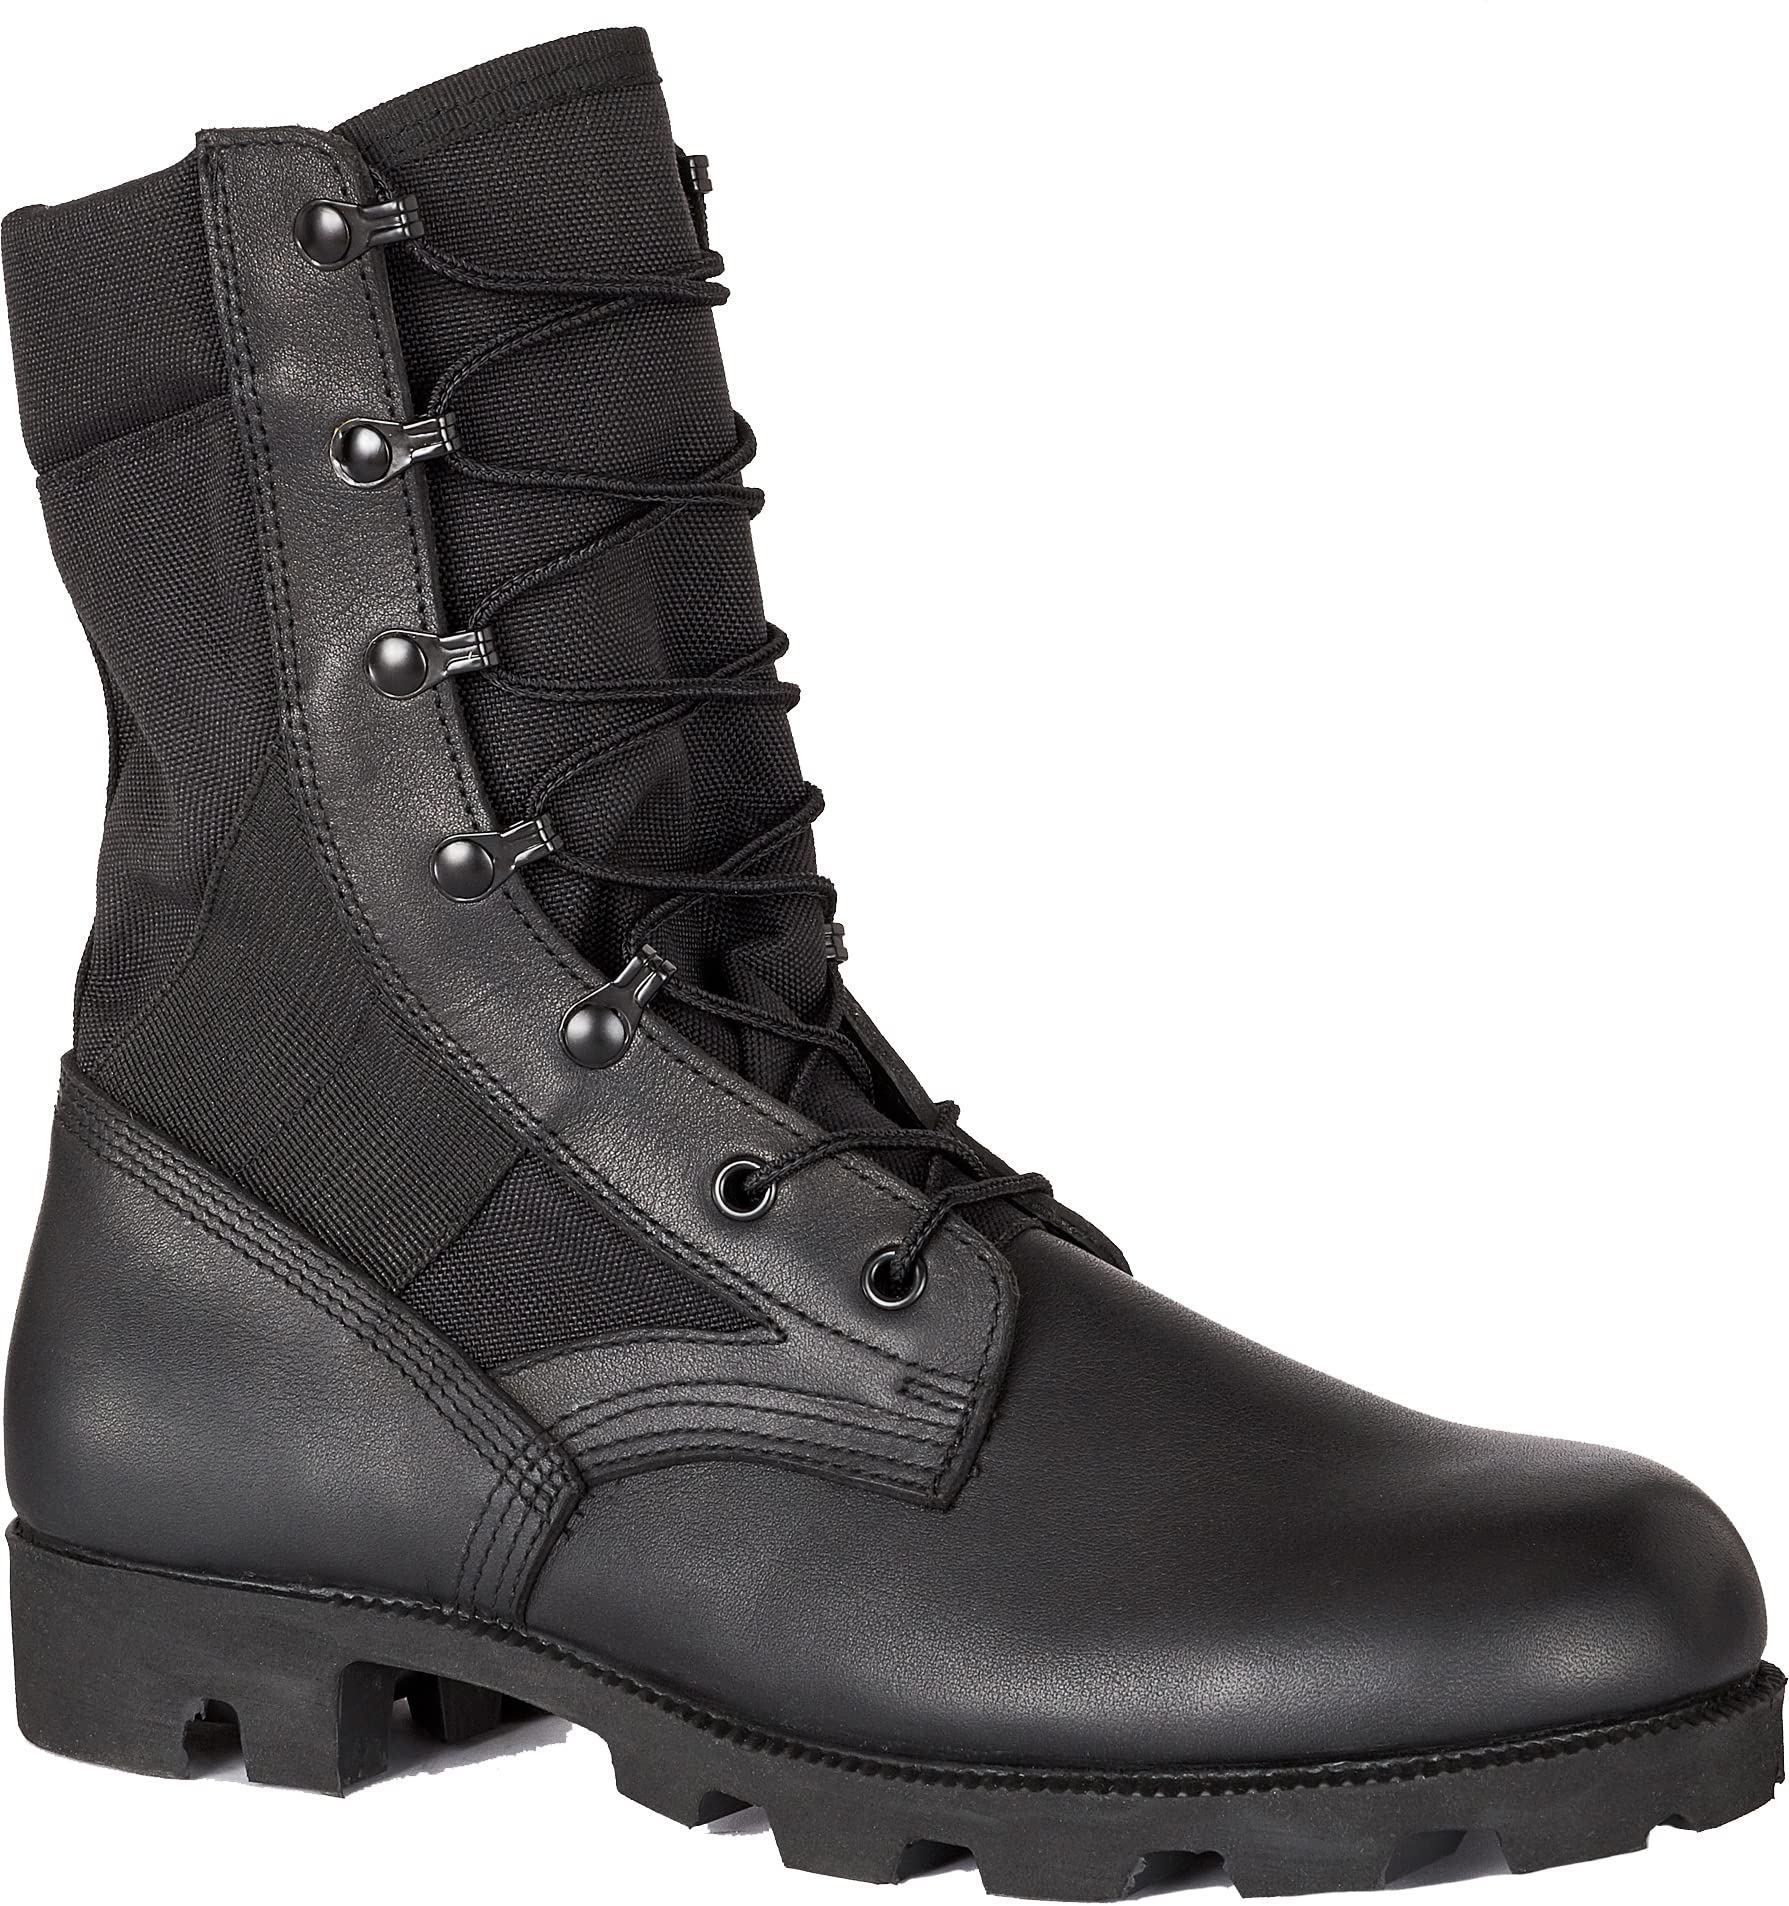 Belleville 8 Inch Canopy Jungle Boots - Highly Breathable Leather & Nylon Upper, Double & Triple Stitched Seams, Medial Side Drainage Vents, and Classic Panama Outsole Tread